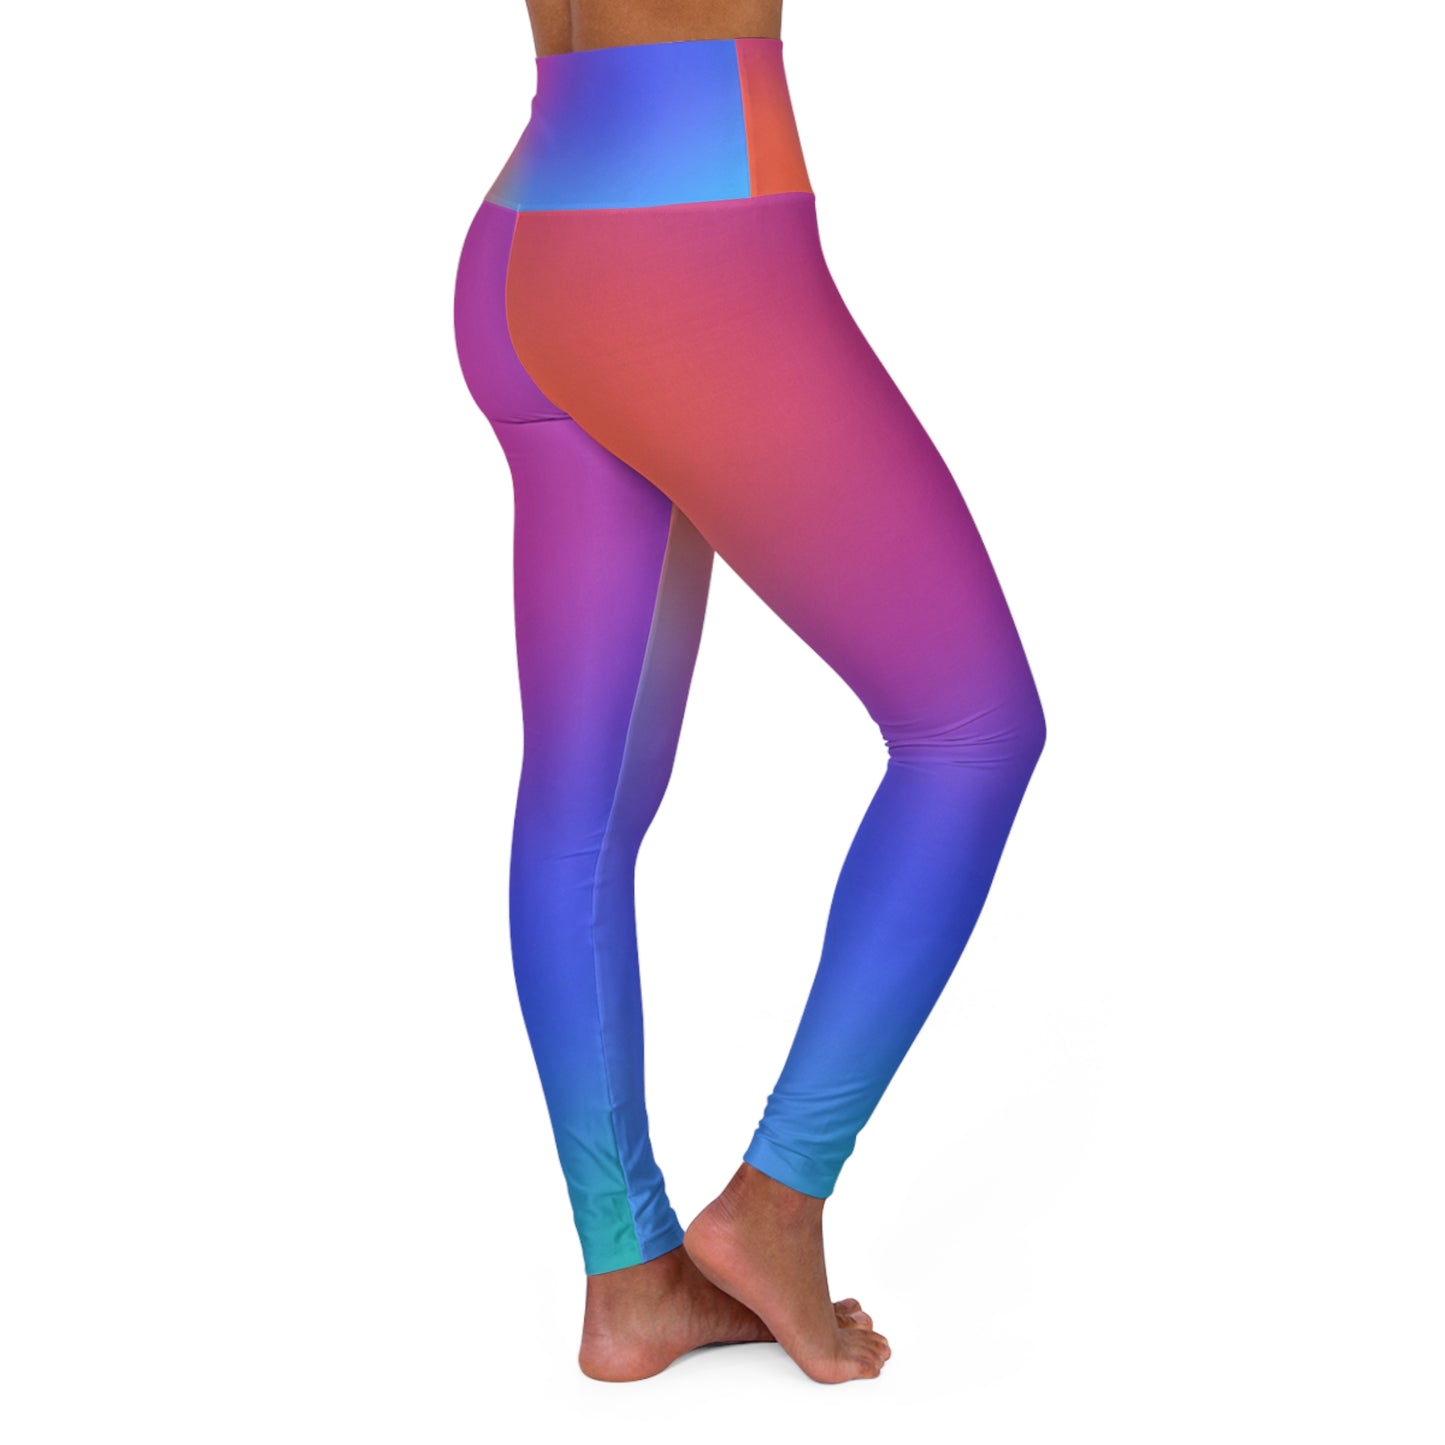 Rainbow Slide Artistic Abstract Skinny Fit High Waisted Yoga Leggings, Expertly Crafted in the USA